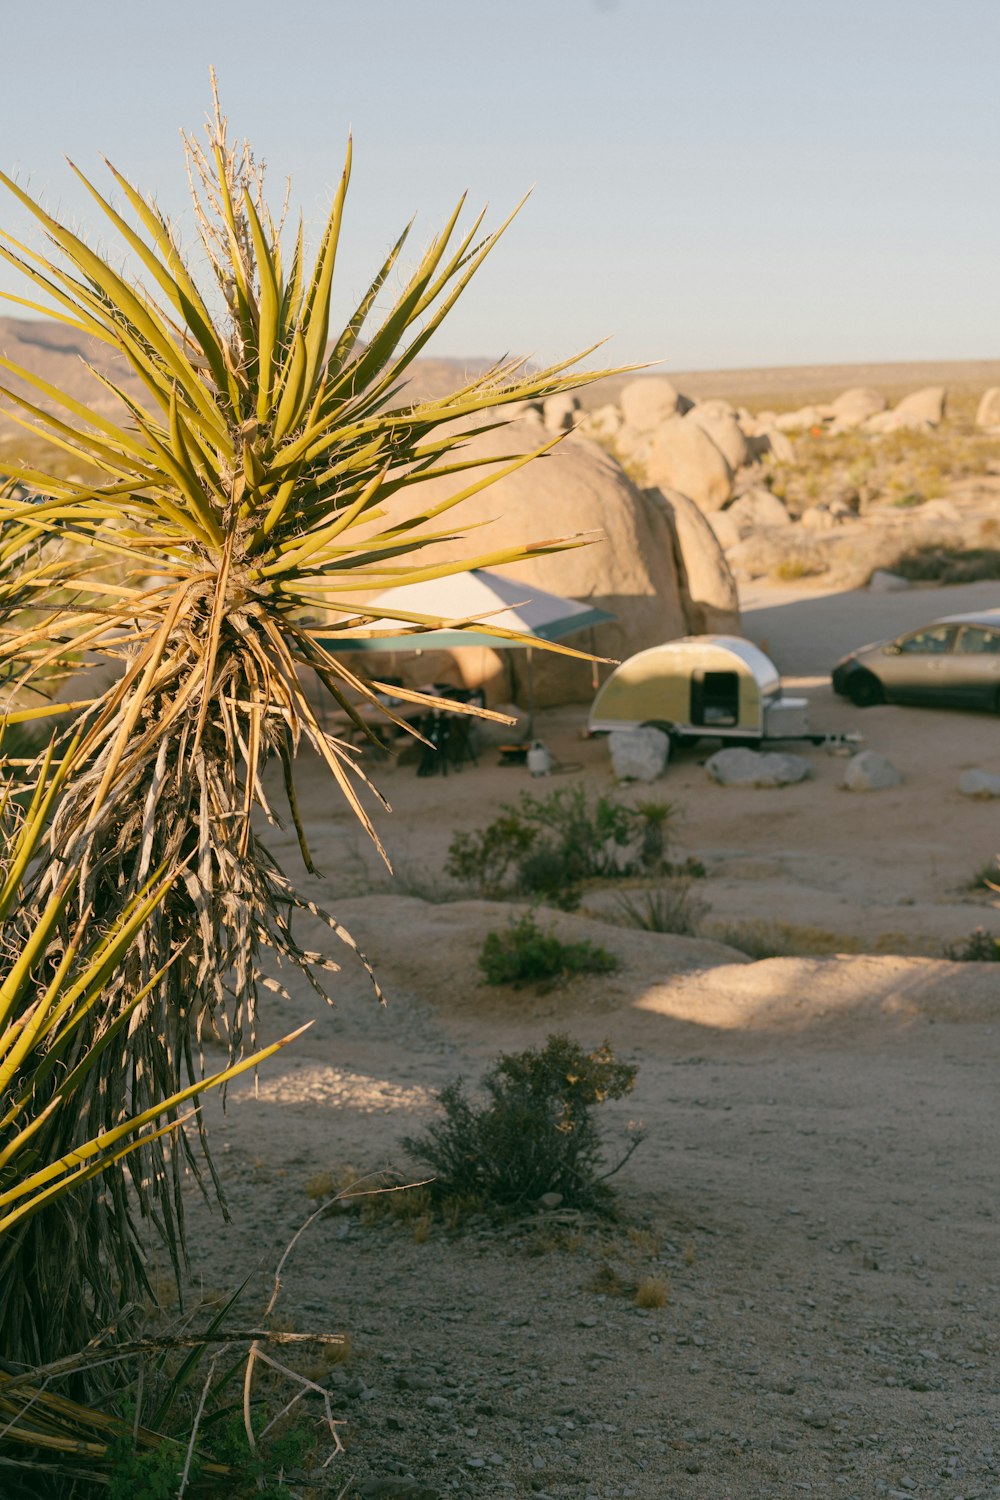 a desert scene with tents and a cactus